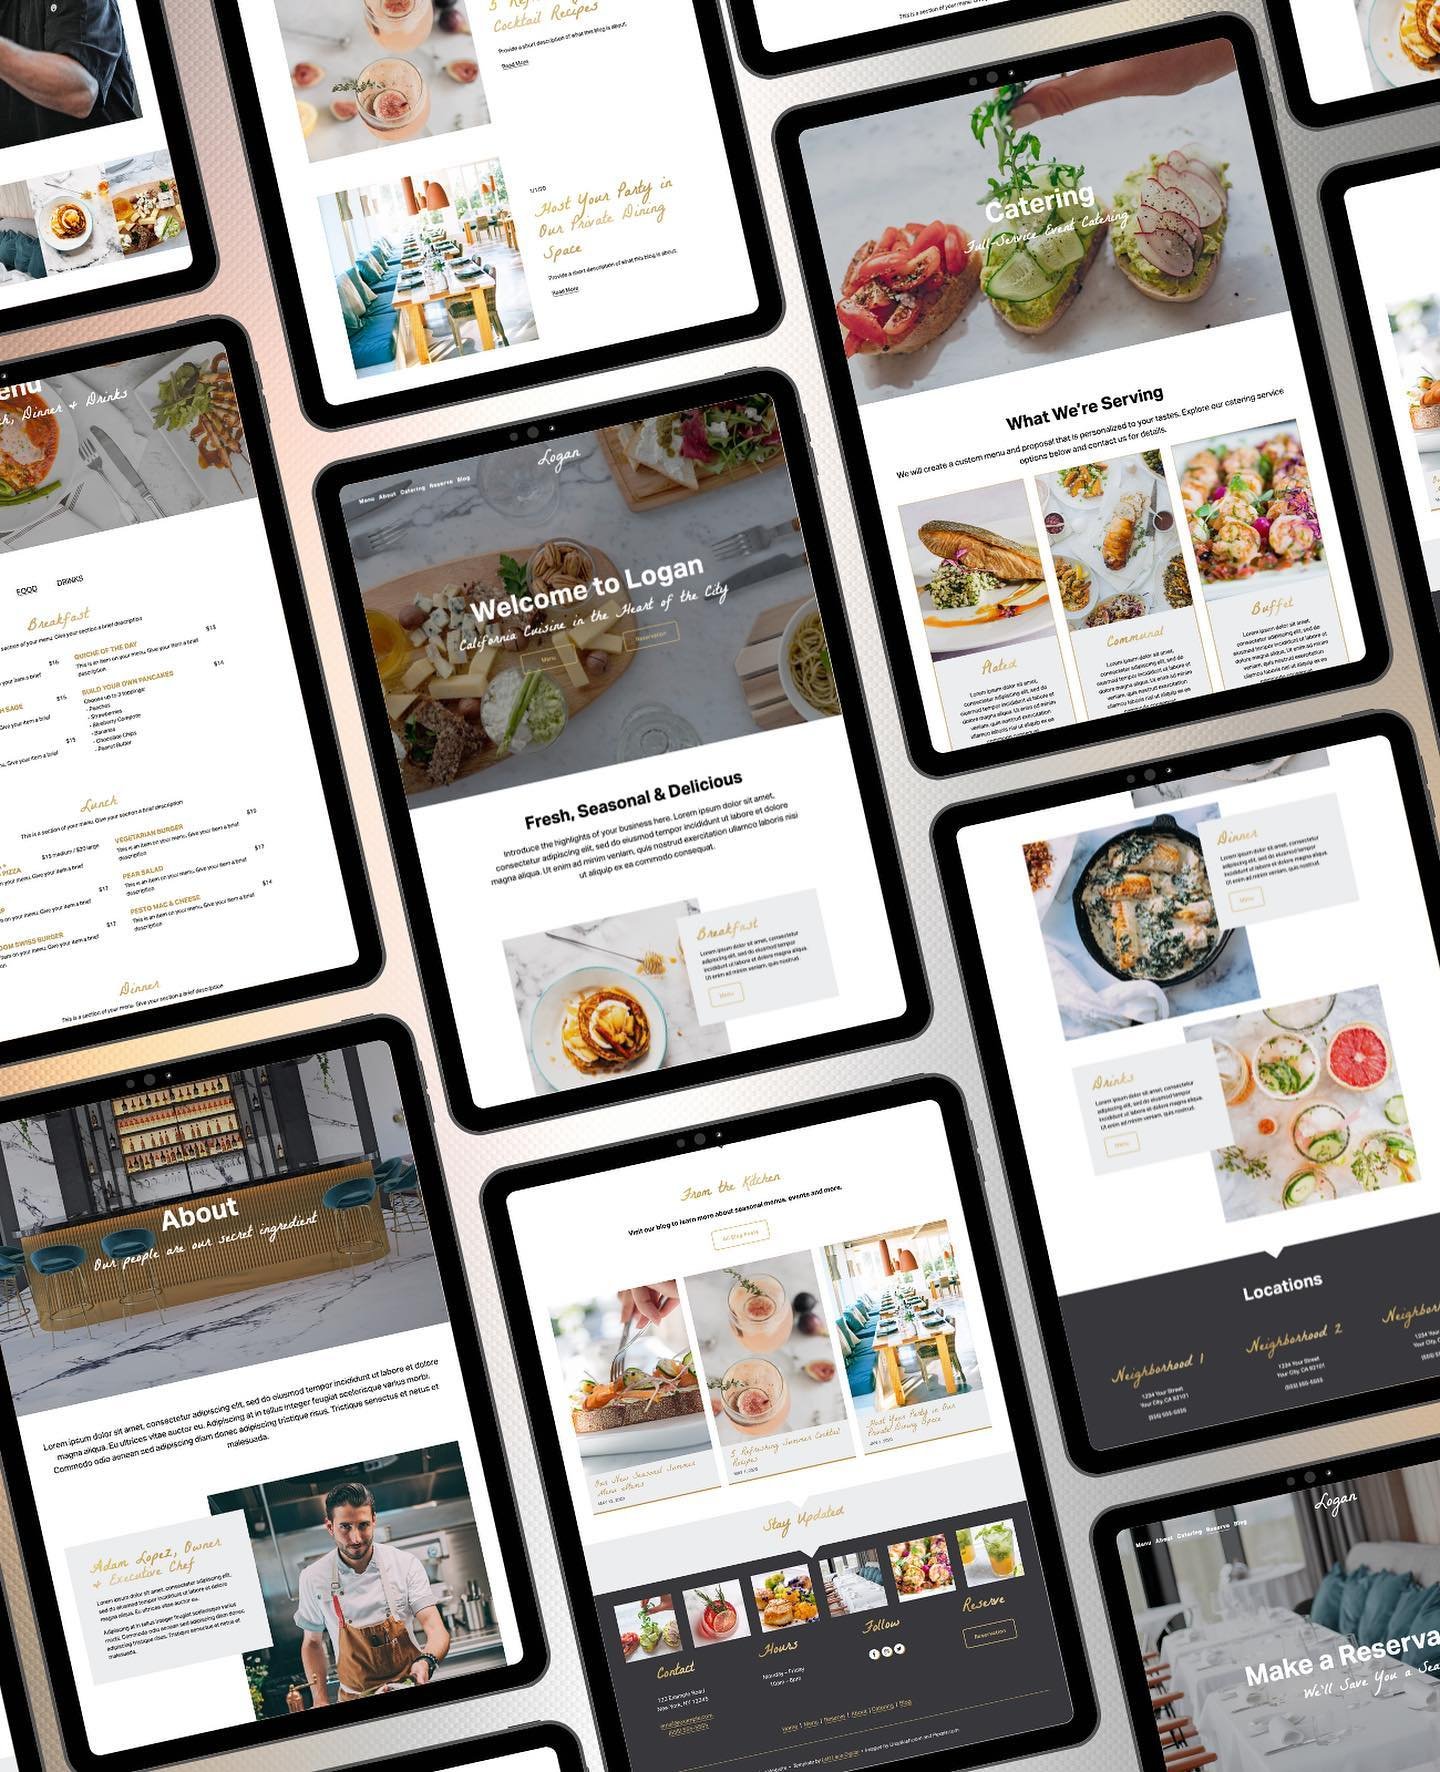 Let your restaurant shine like a Michelin star with Logan, my newest website template. With a delectable blend of user-friendly, mobile-responsive design and tantalizing visuals, I've crafted a website experience that's as memorable as your signature